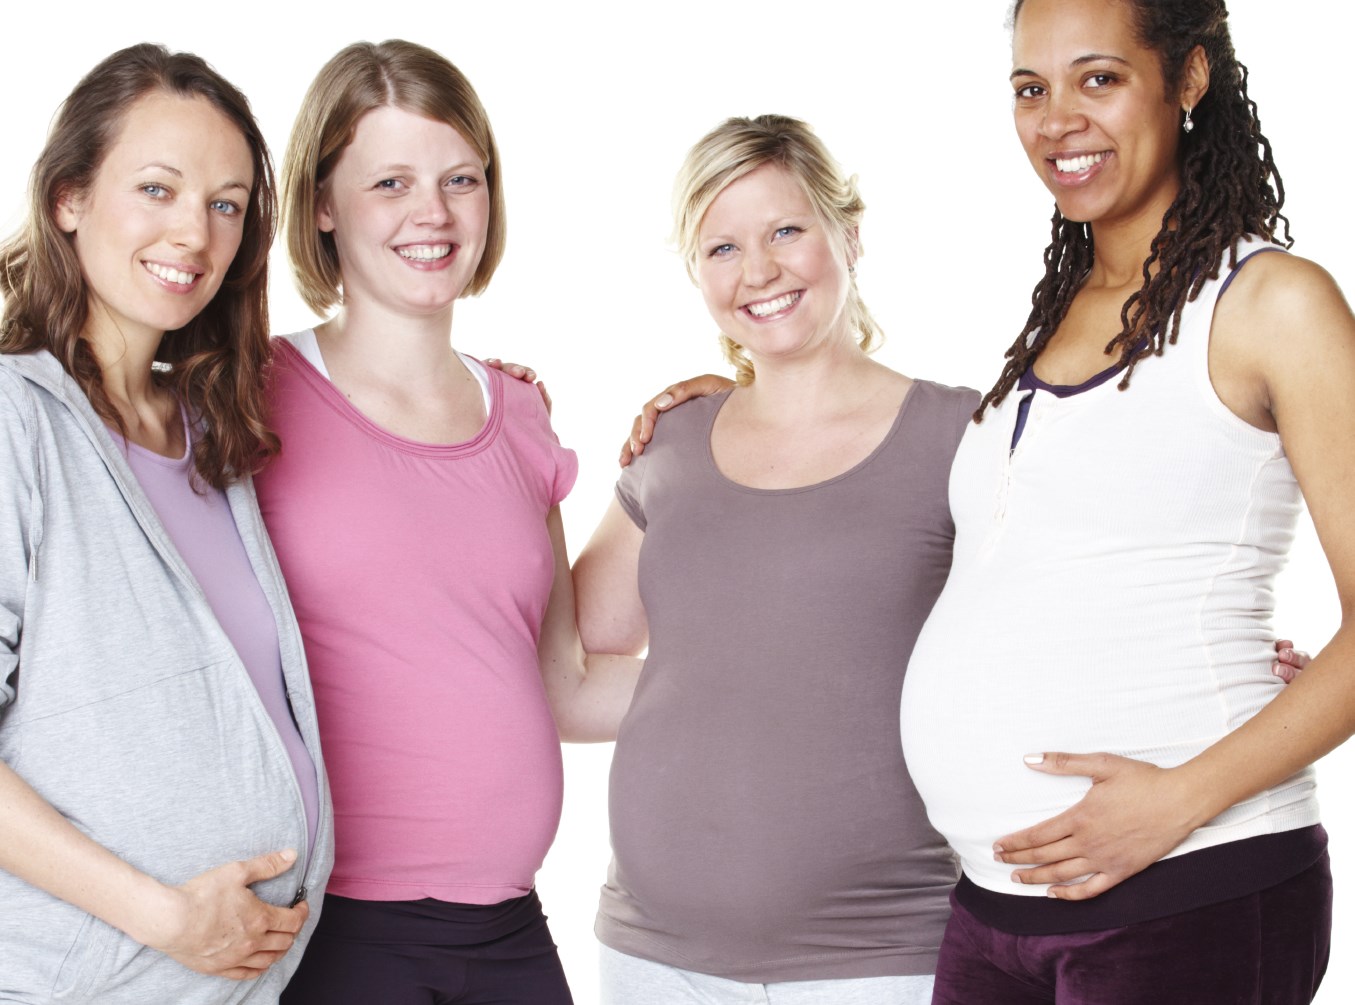 TOP TIPS TO ENSURE PREGNANCY HEALTH BOTH FOR THE MOM AND THE BABY